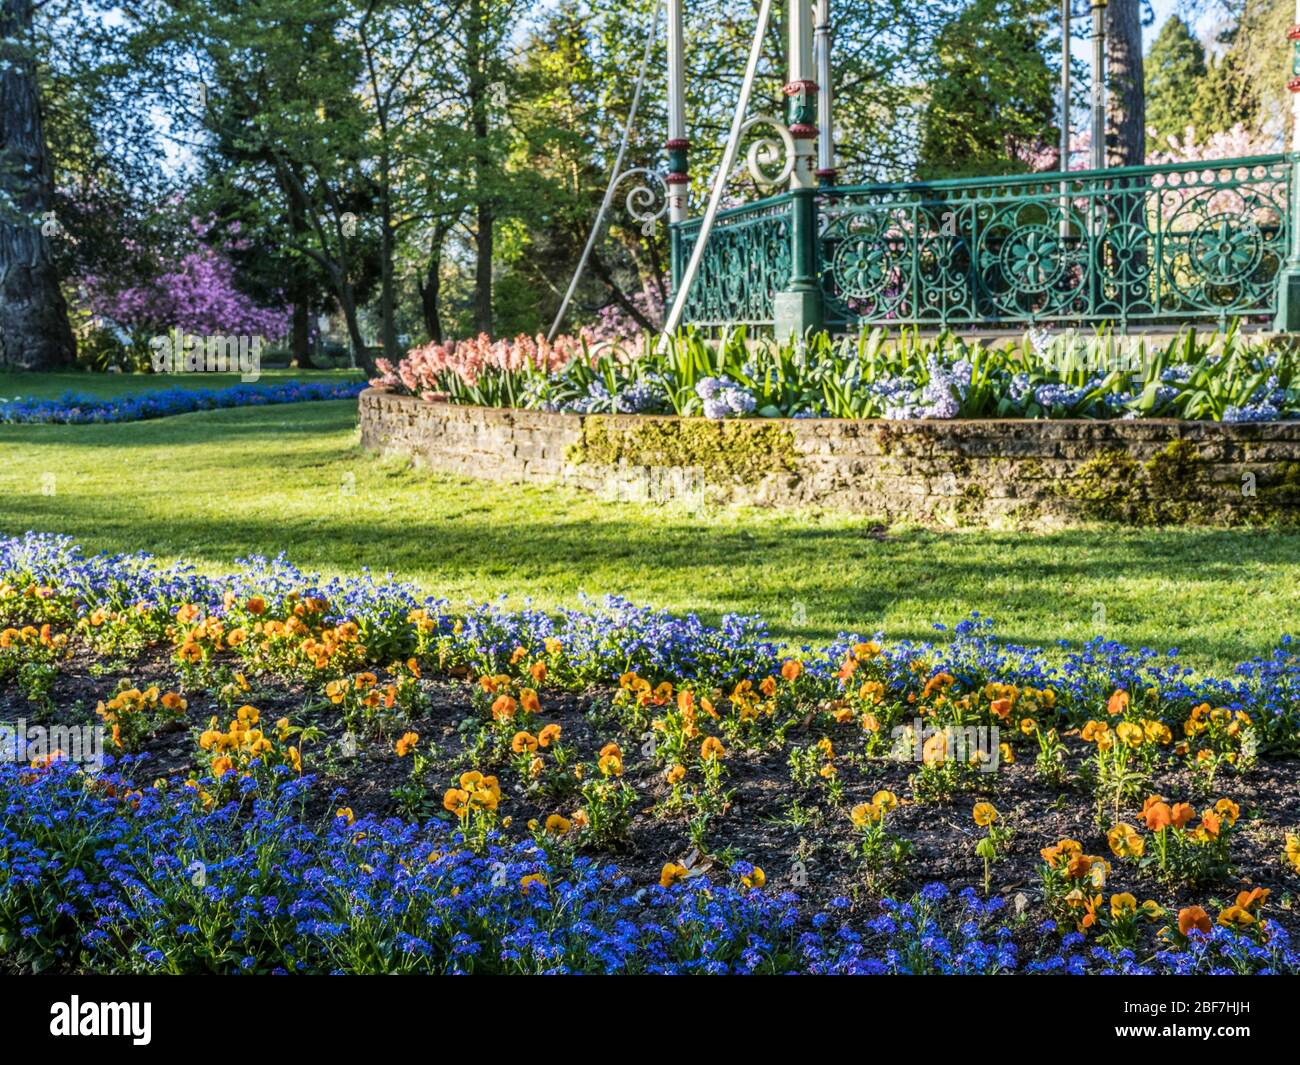 Spring bedding in an English public park with part of a Victorian bandstand in the background. Stock Photo